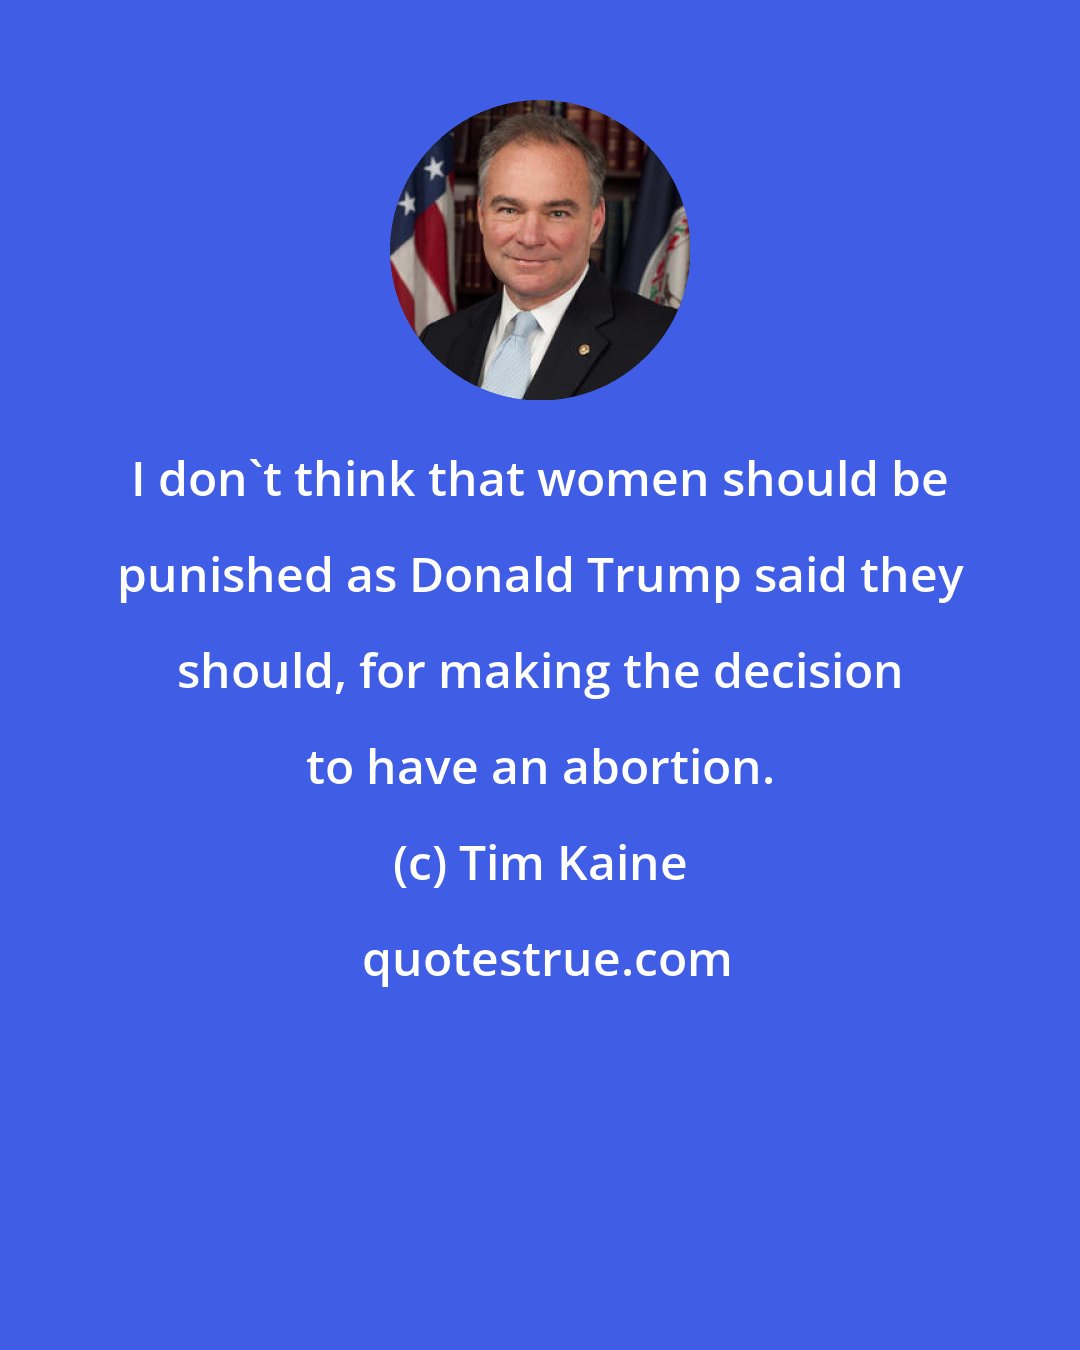 Tim Kaine: I don't think that women should be punished as Donald Trump said they should, for making the decision to have an abortion.